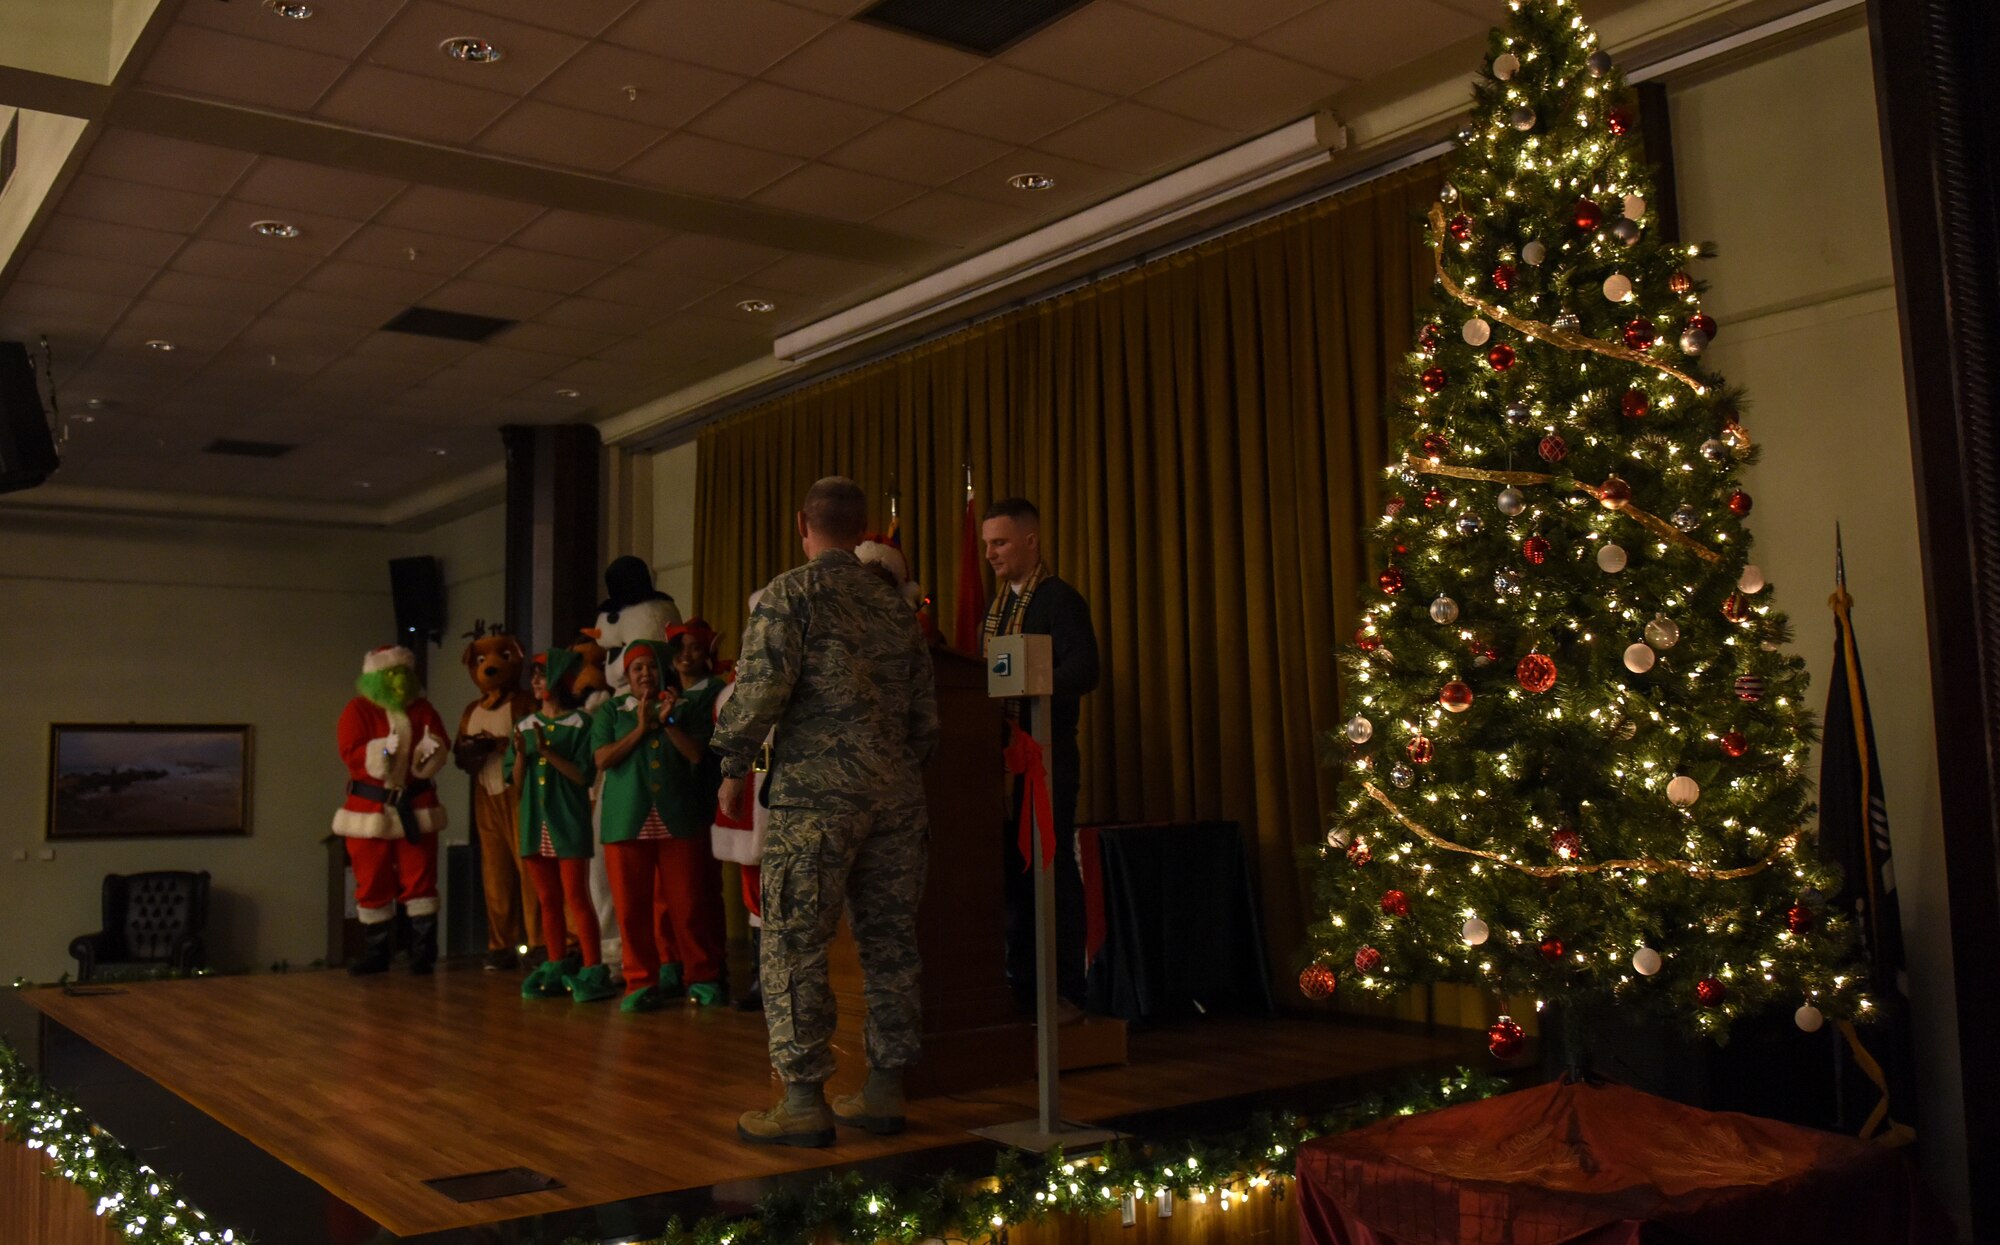 Airmen dressed as holiday characters join U.S. Air Force Col. Britt Hurst on stage during a holiday tree lighting ceremony.